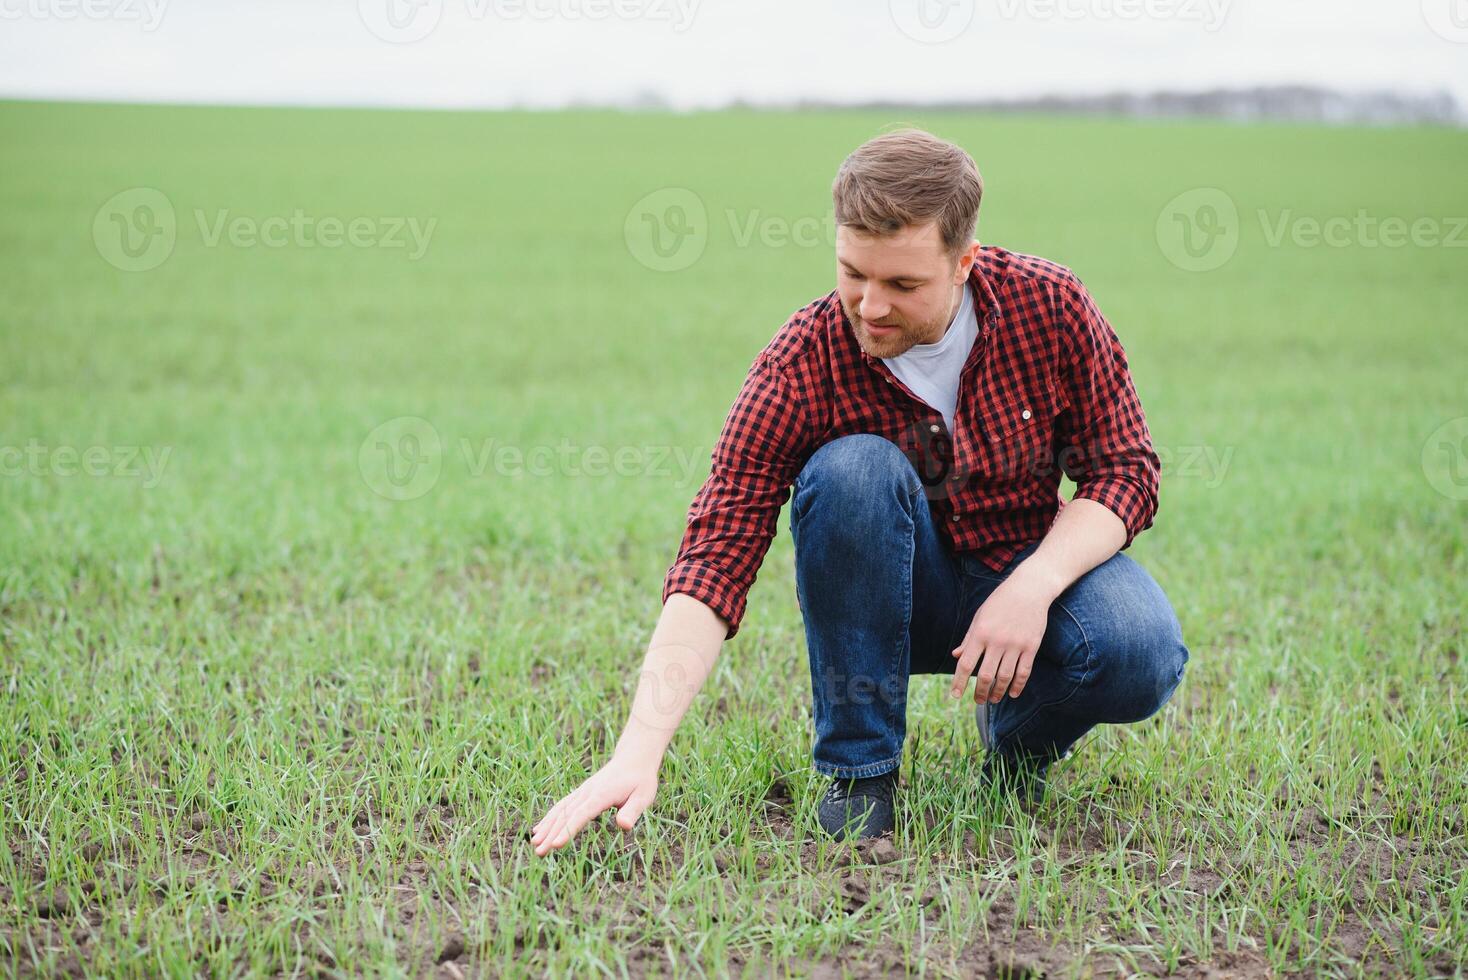 Farmer holds a harvest of the soil and young green wheat sprouts in his hands checking the quality of the new crop. Agronomist analysis the progress of the new seeding growth. Farming health concept photo